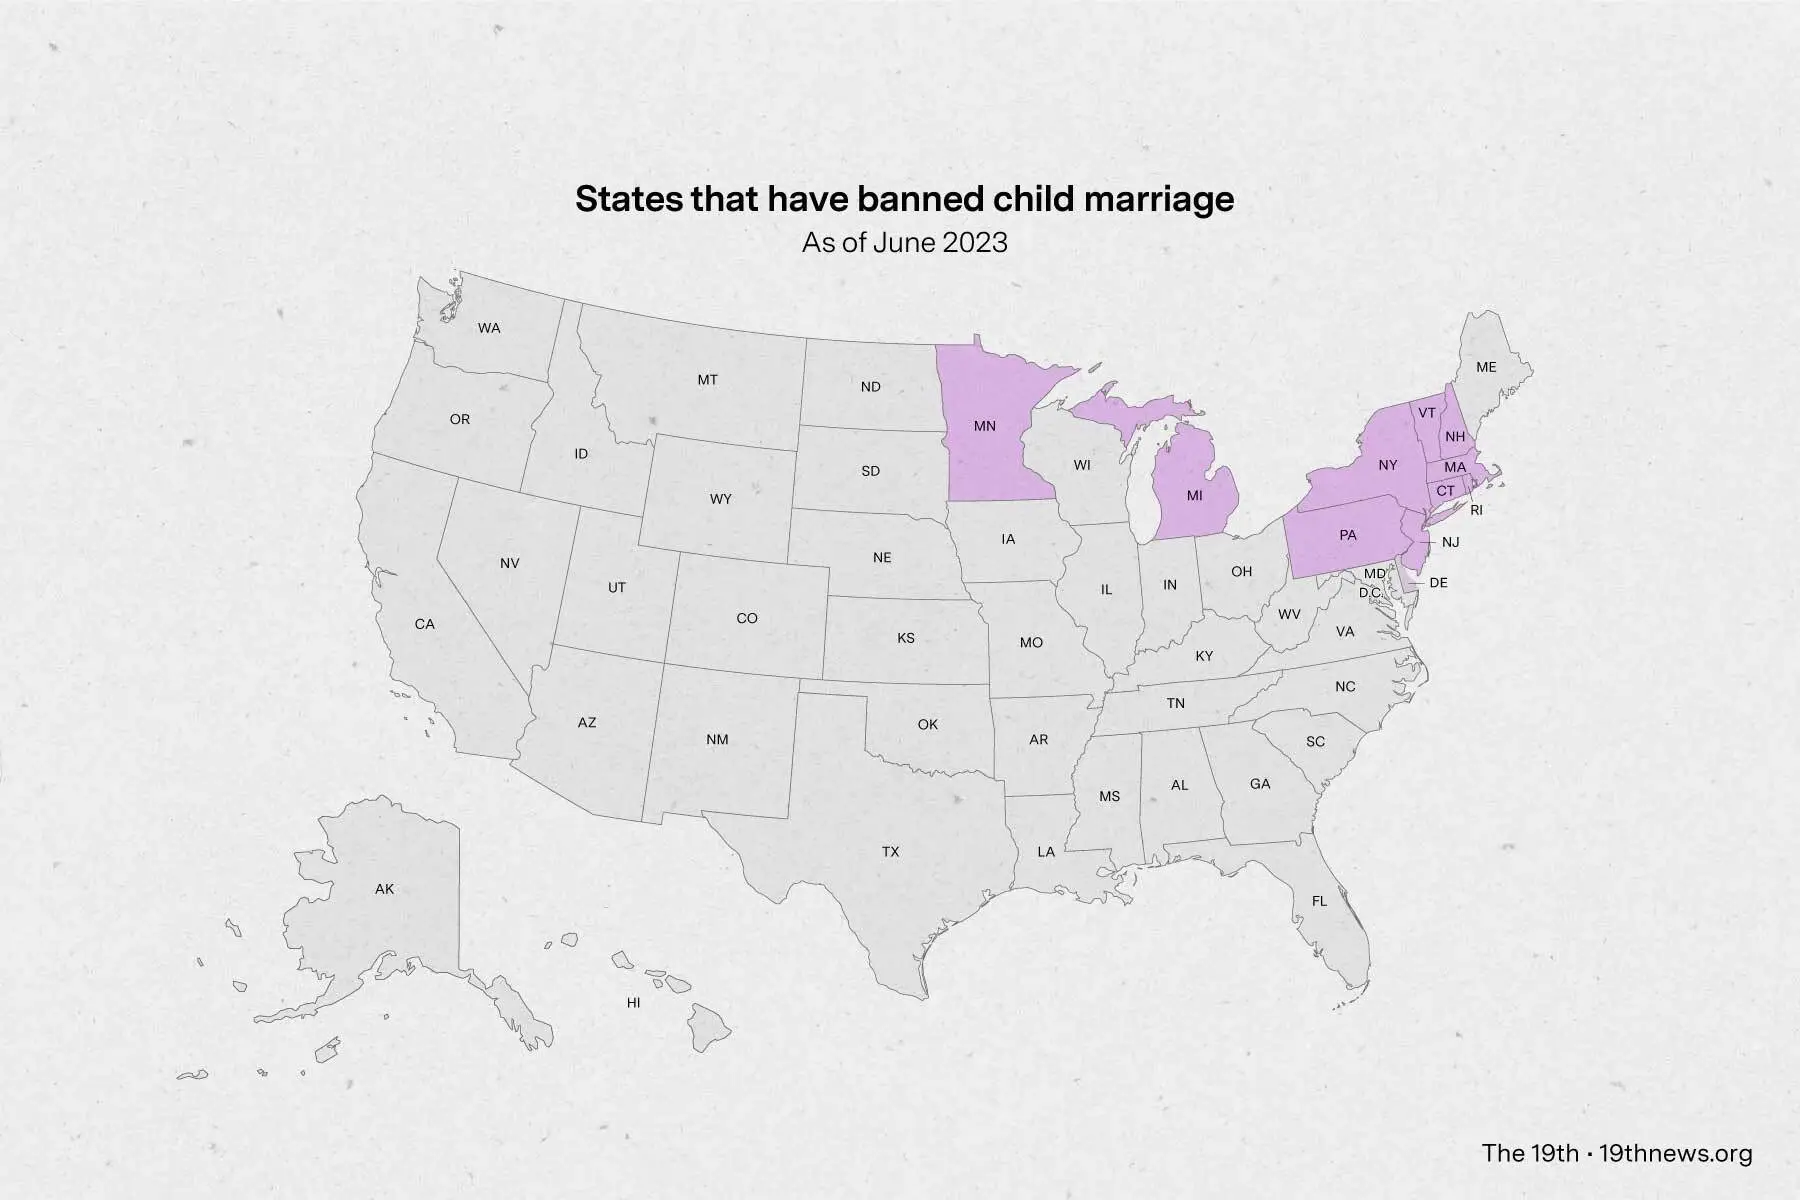 Child marriage is still prevalent in the image